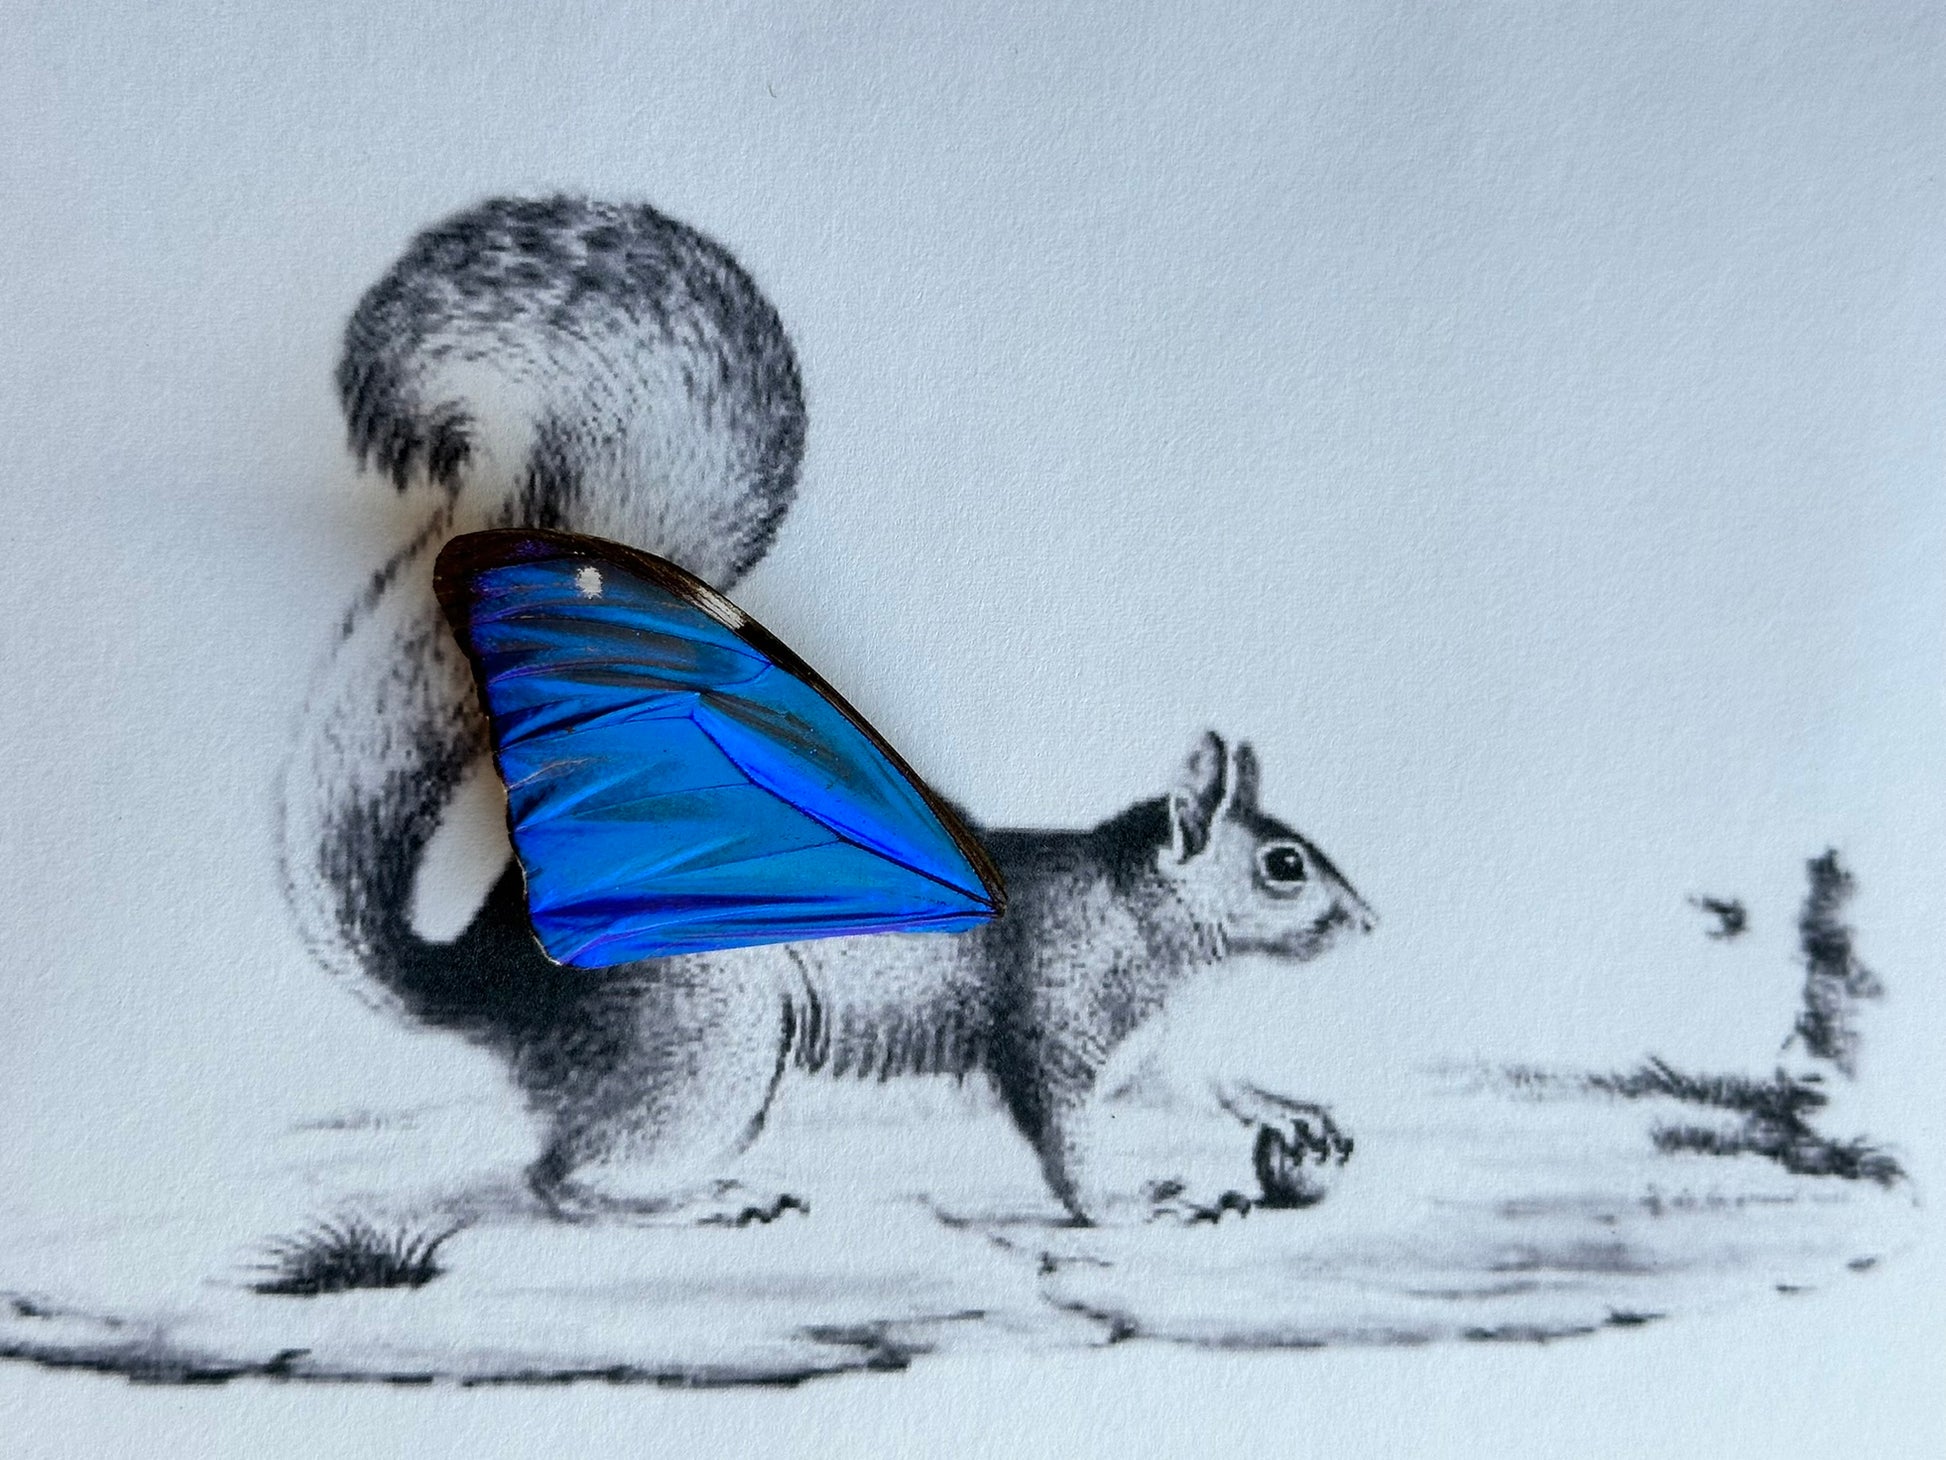 a picture of a squirrel with a blue butterfly on its back